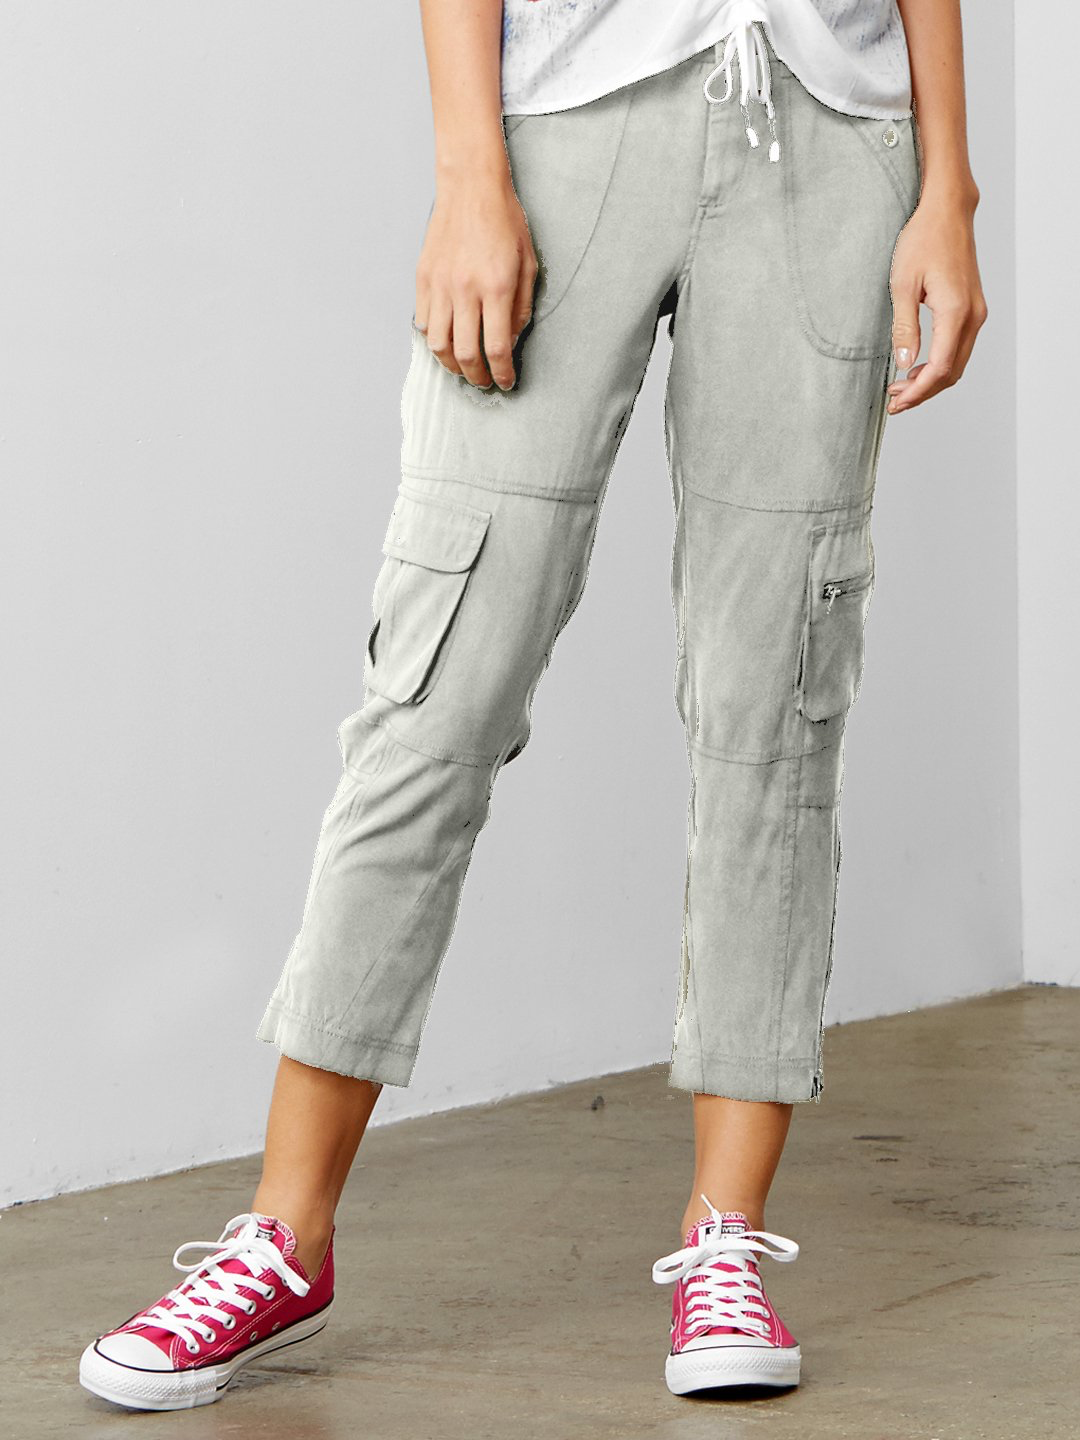 Go Utility Pant - Kingfisher Road - Online Boutique